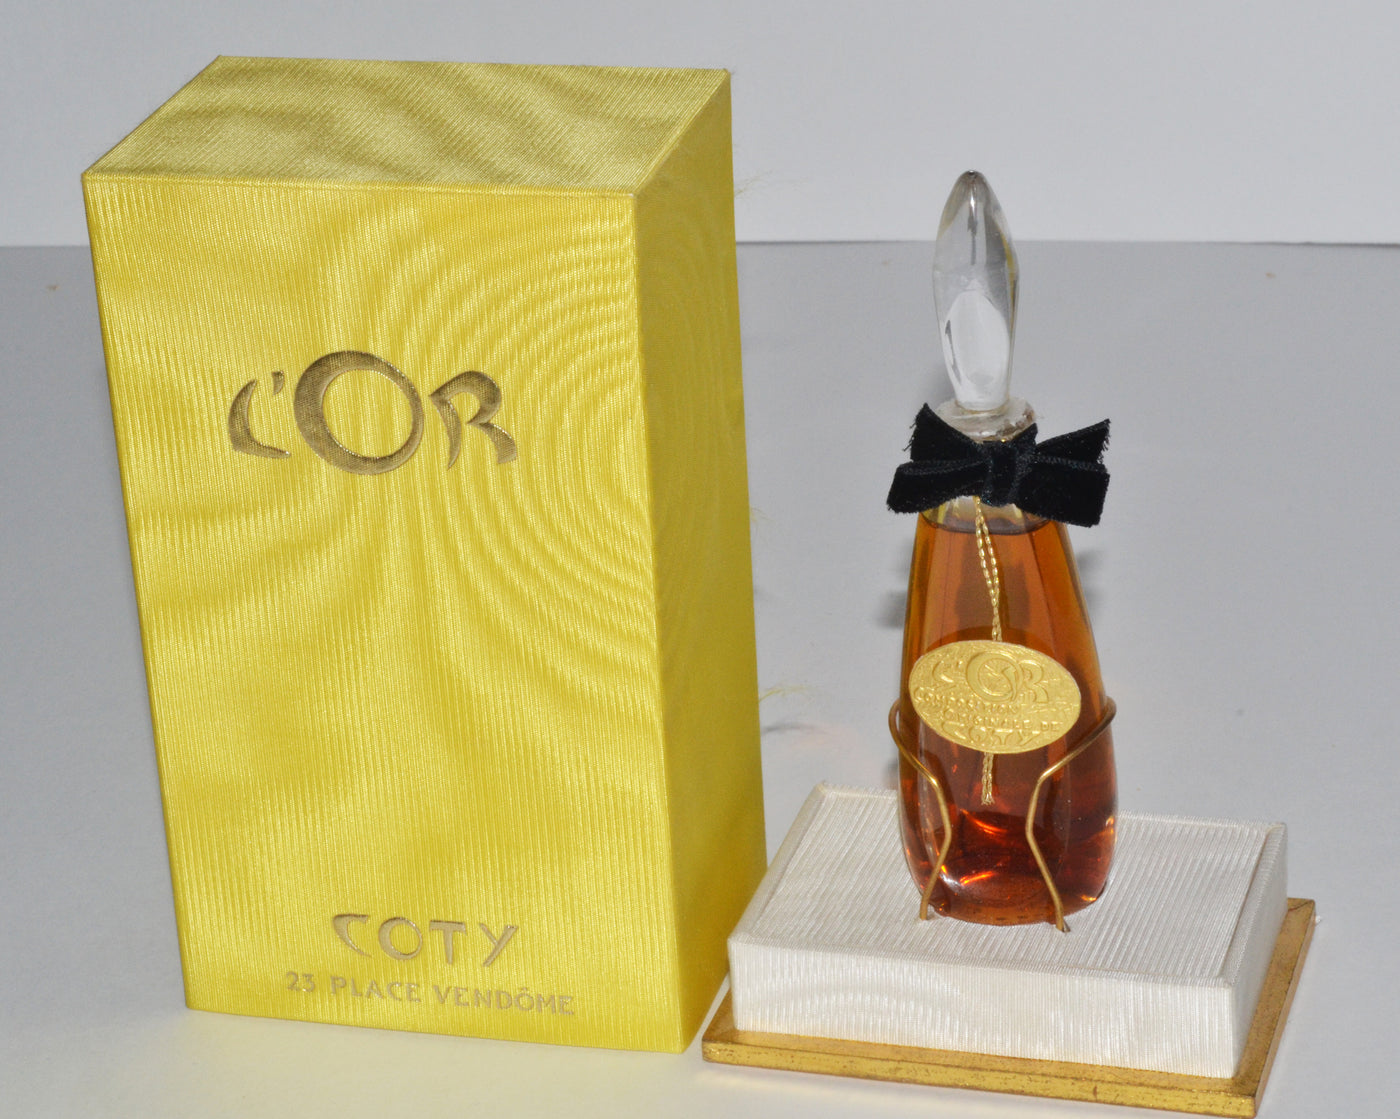 L'Or Perfume By Coty